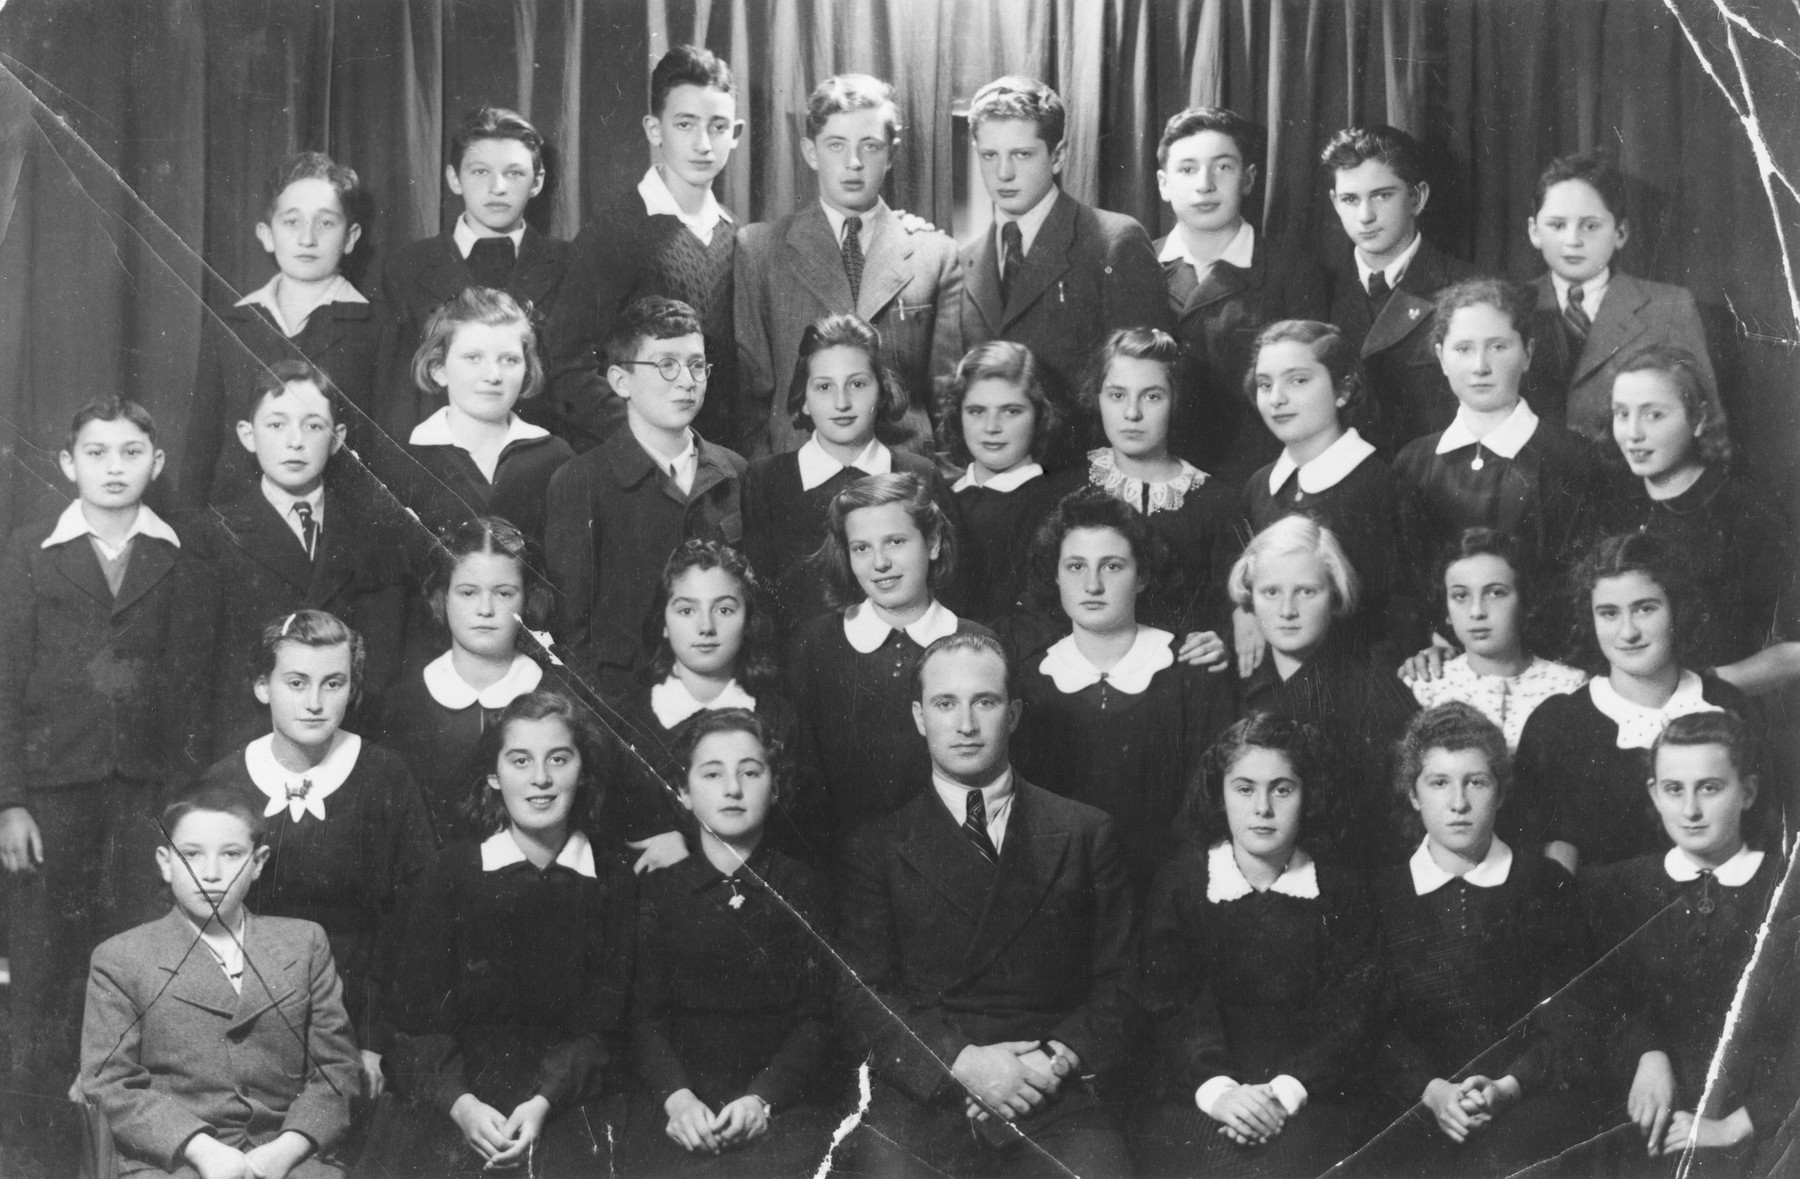 Group portrait of the students of the Schwabes Hebrew gymnasium in Kovno, Lithuania.

Among those pictured are Ben Zion (Nolik) Schmidt (top row, second from the right), Freda (Shottenstein) Schatenstein (second row from bottom, fourth person from right), and Ezra Jodidio (back row, fourth from the left).